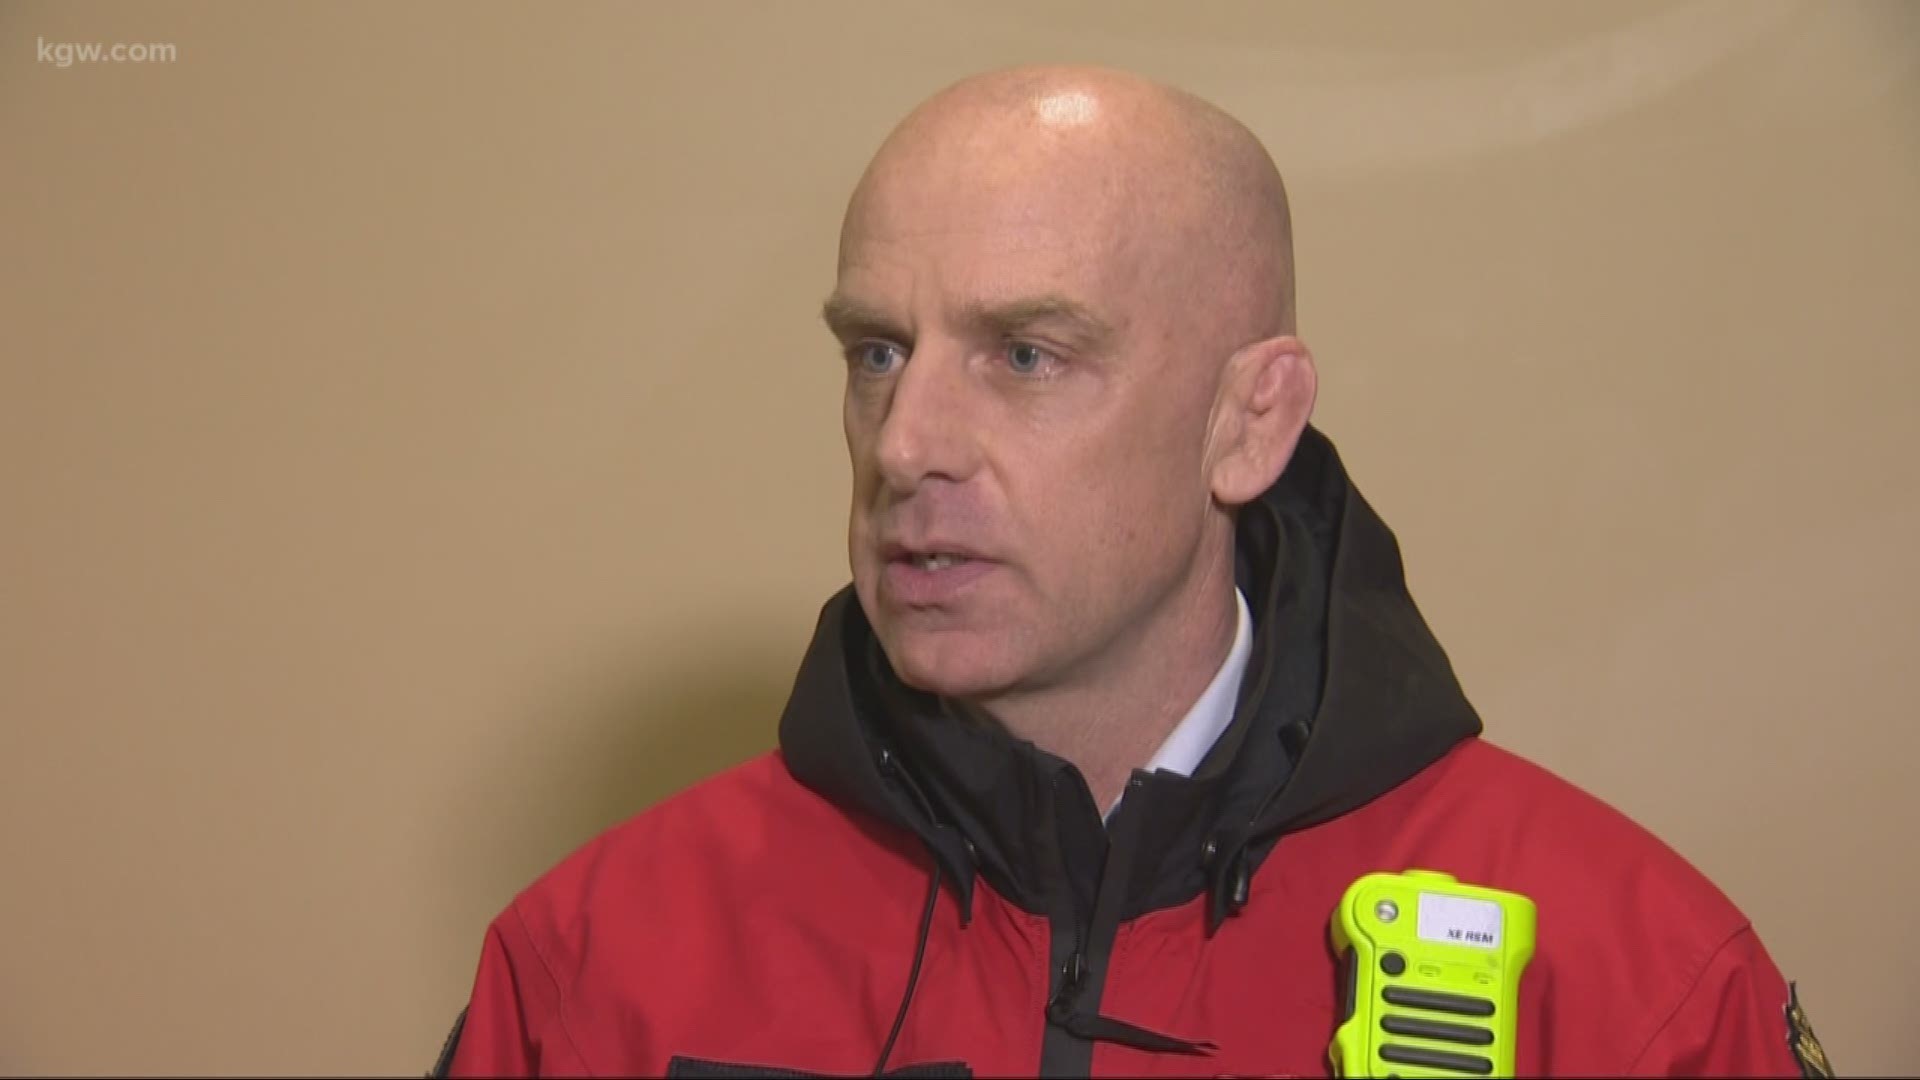 Portland’s fire chief has abruptly resigned.